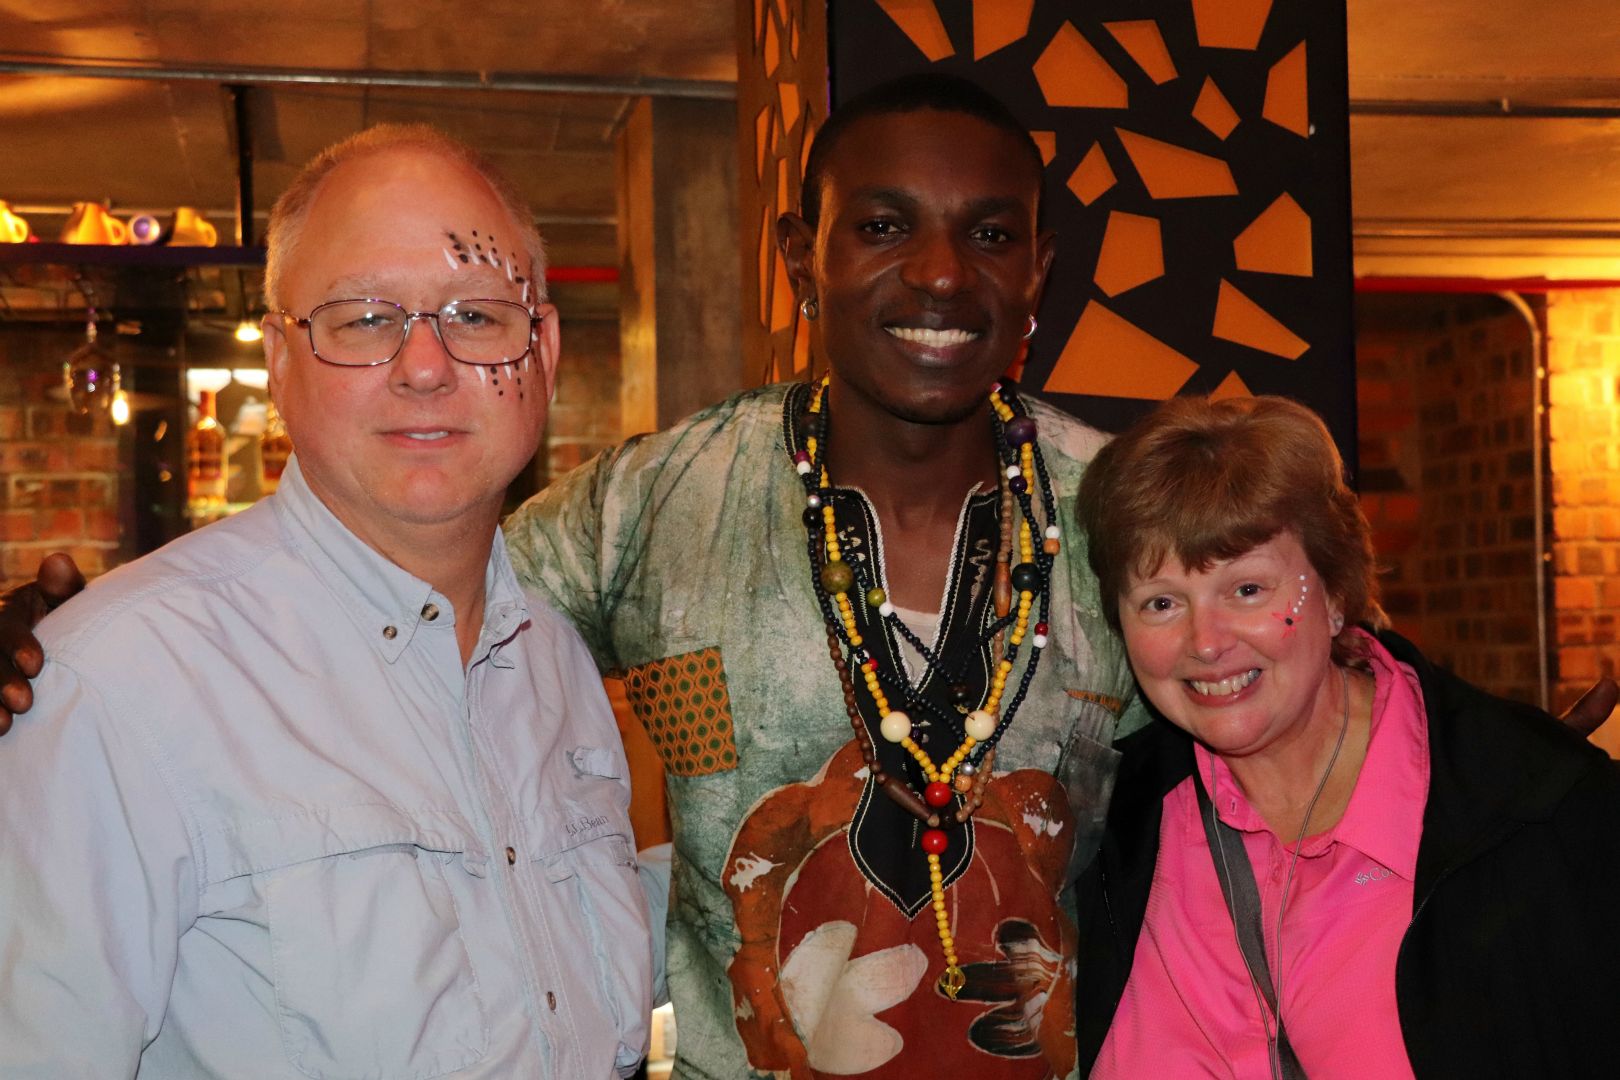 Bob and Carol with Zulu drummer musician - Gold Restaurant, Cape Town, South Africa